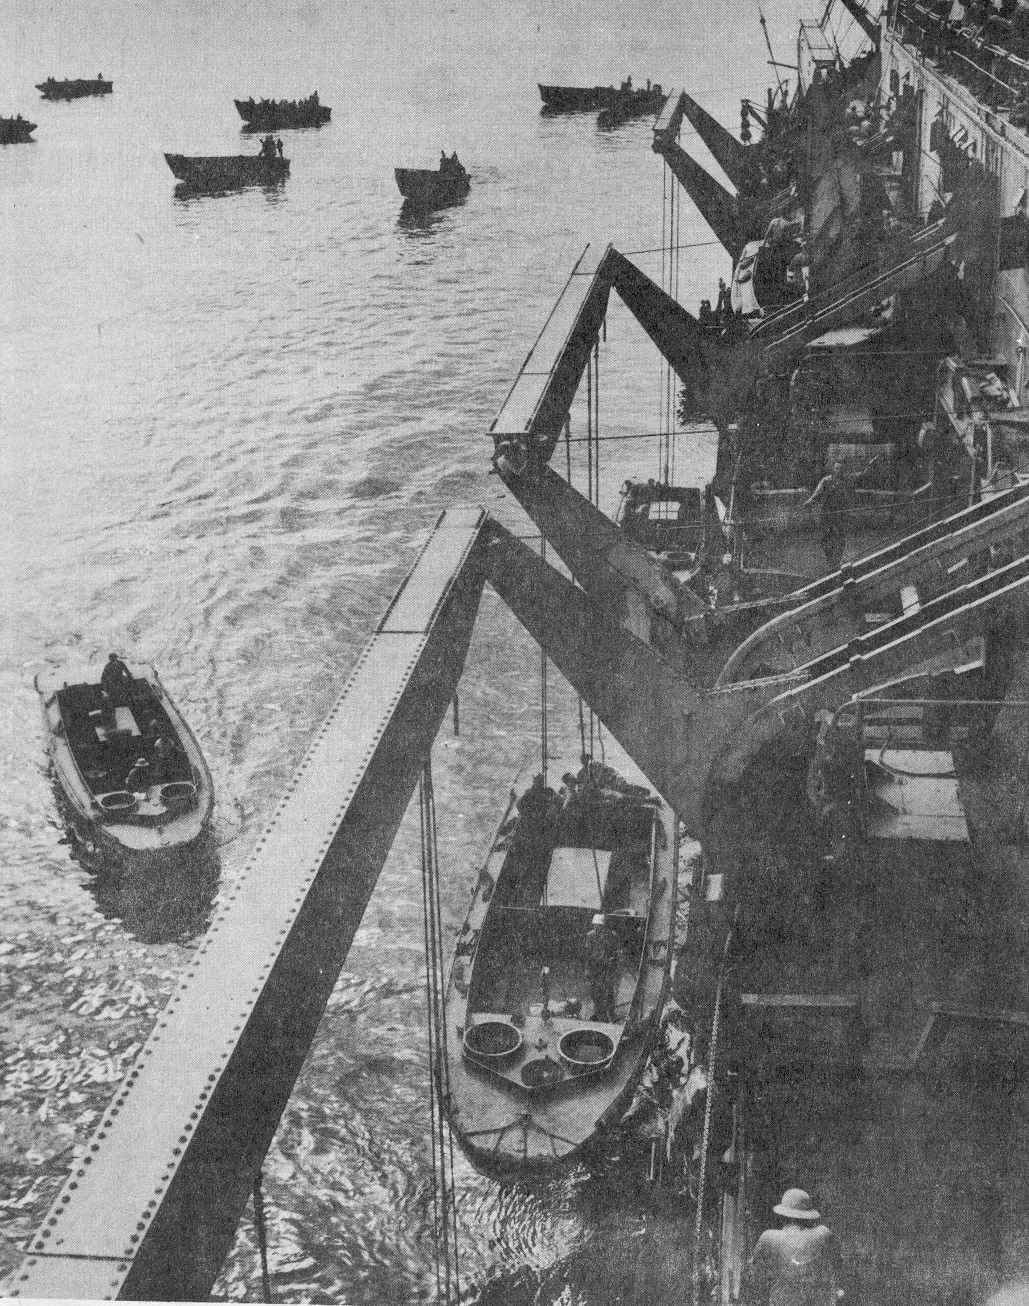 3.	A transport deploying a Landing Craft Personnel (LCP) for the landings at Guadalcanal. Notice the solid bow, tandem machine gun tubs and the stern where depth charges were mounted on Ray Evans’s anti-submarine patrol boats. (Courtesy of the U.S. Navy)